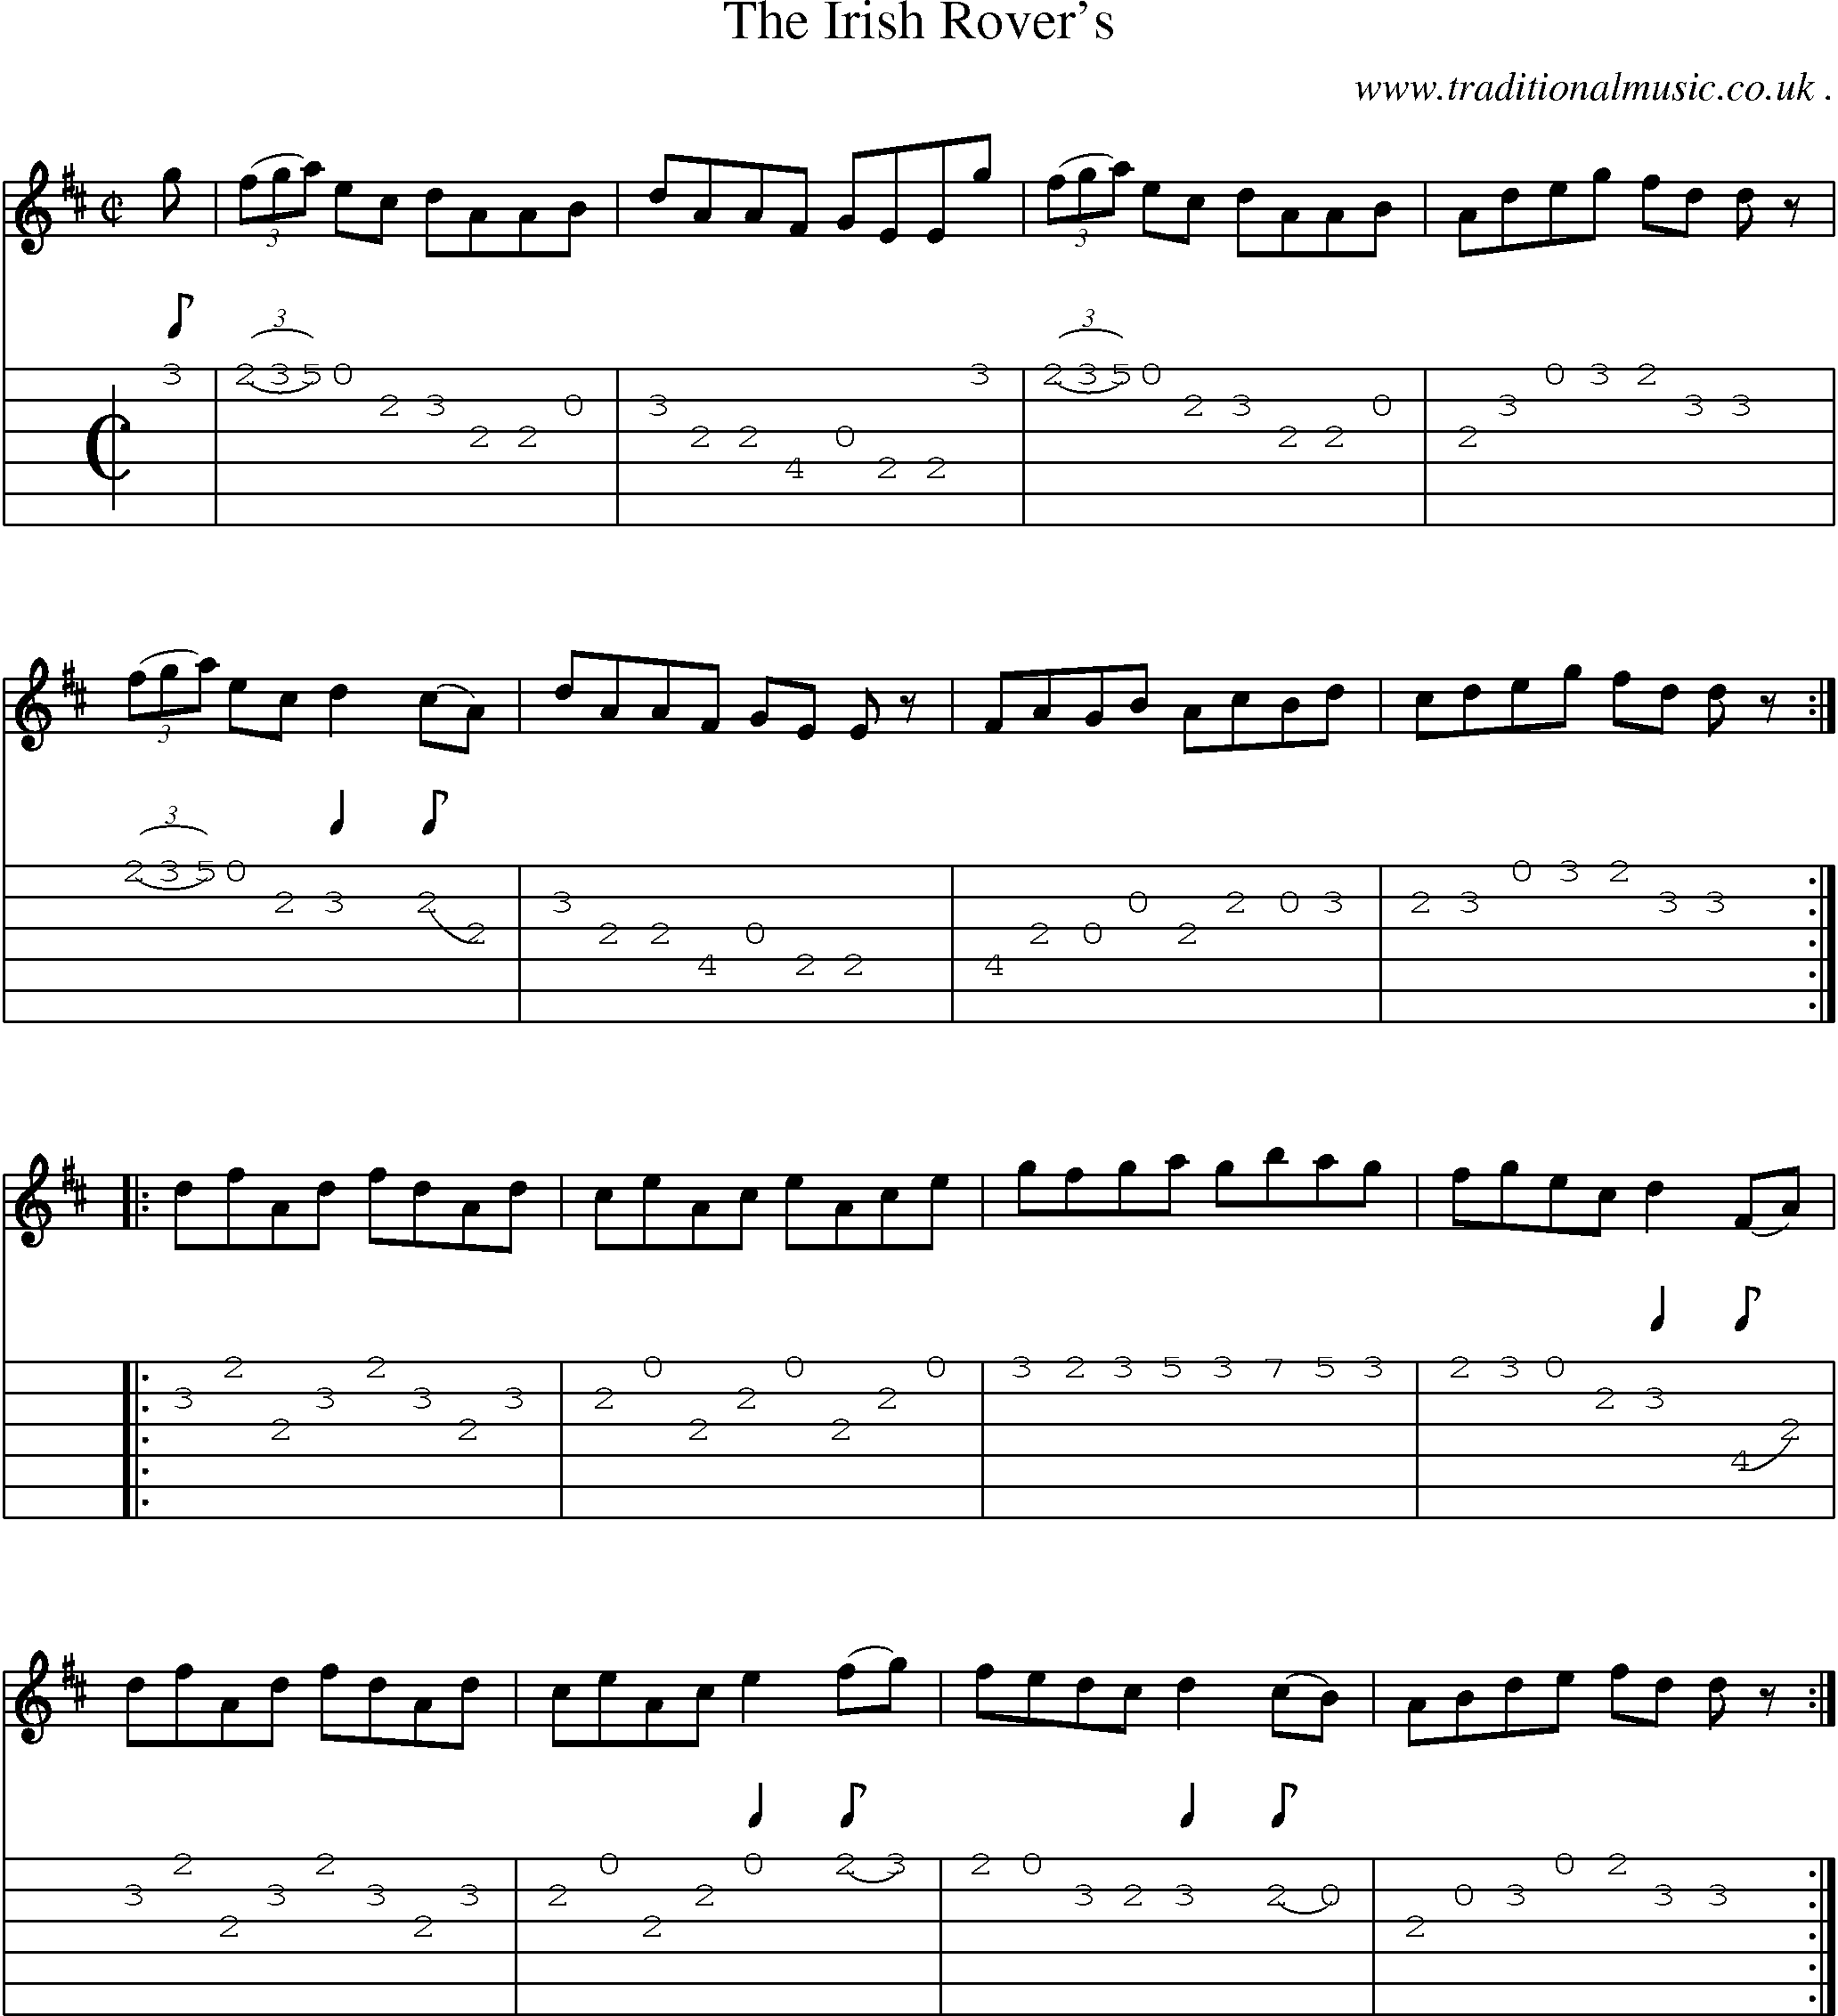 Sheet-Music and Guitar Tabs for The Irish Rovers